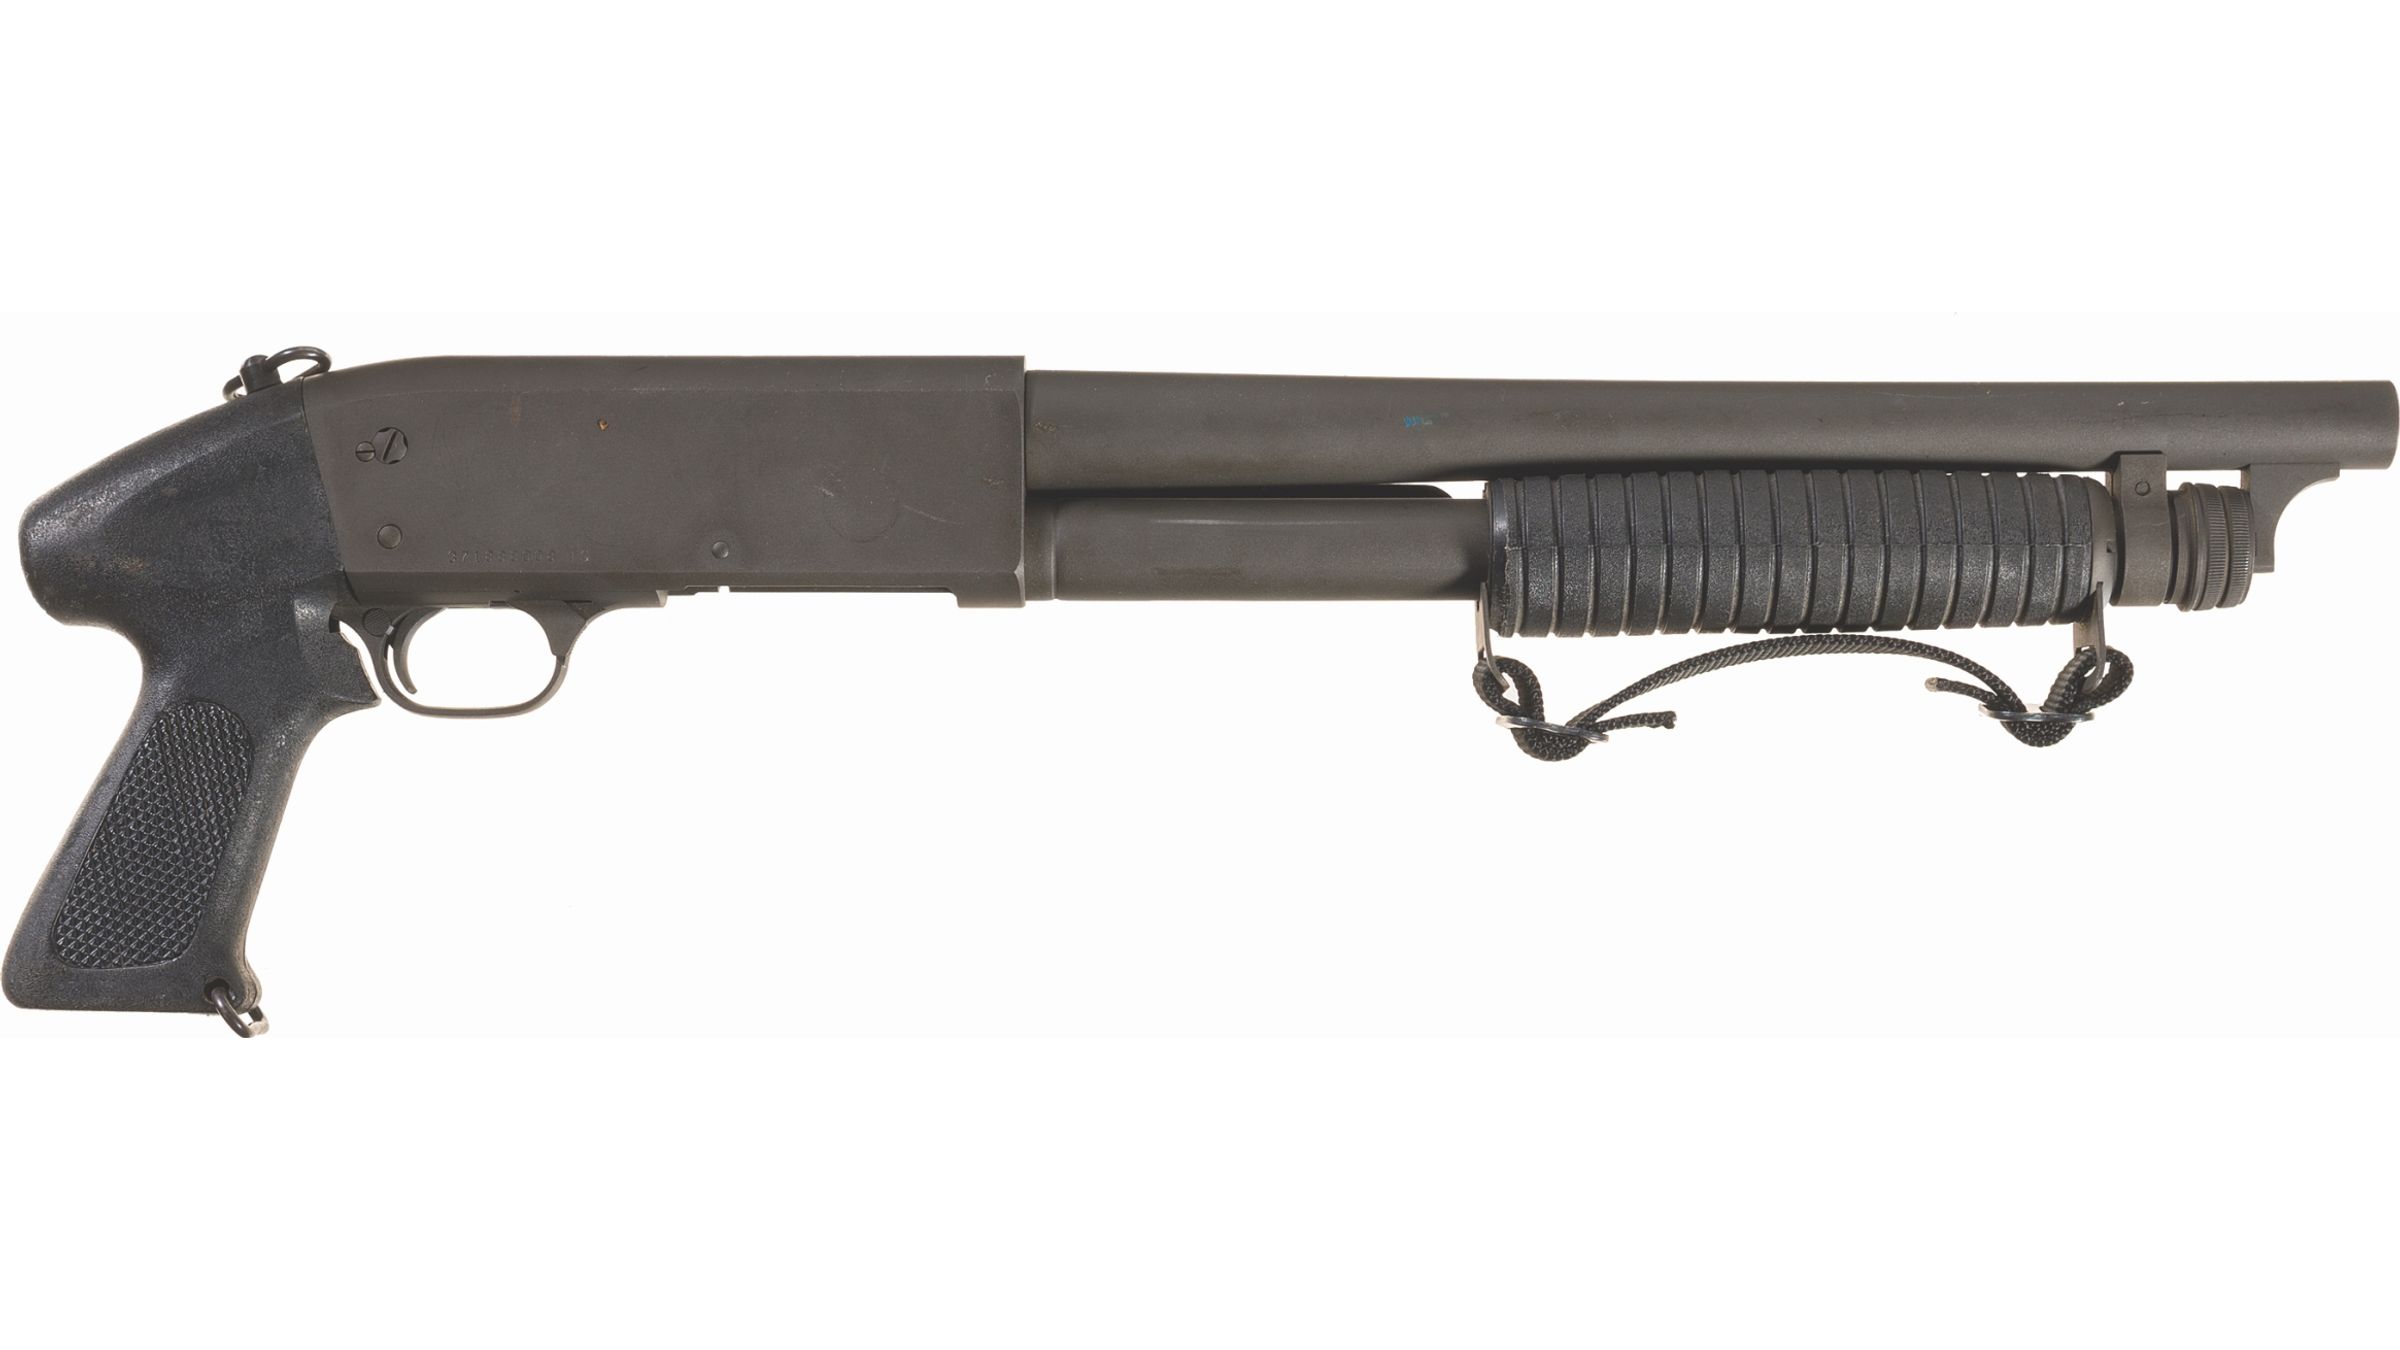 Ithaca 37 DS Police Special. 